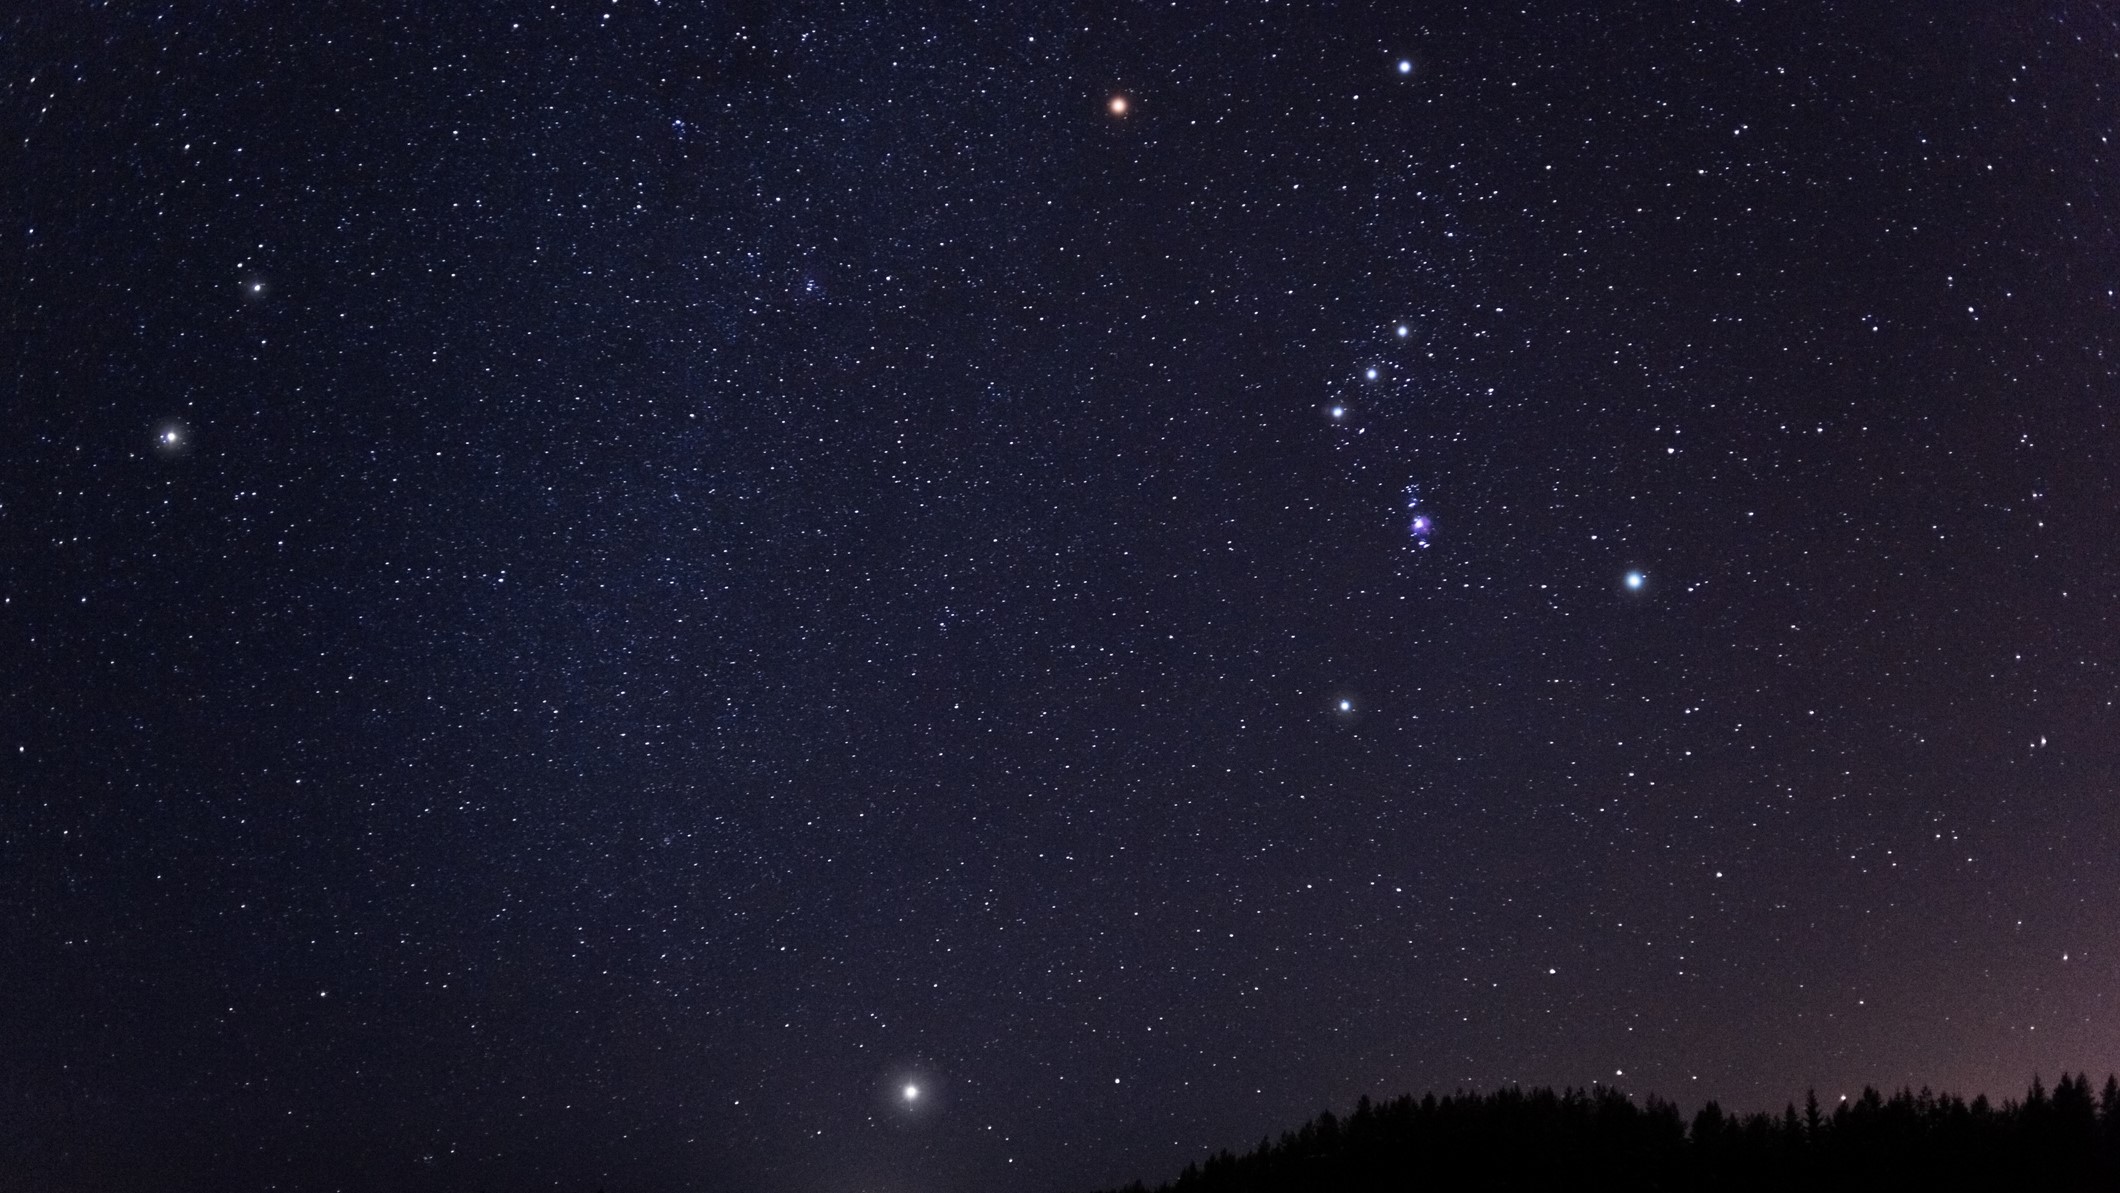 Orion constellation in the night sky.